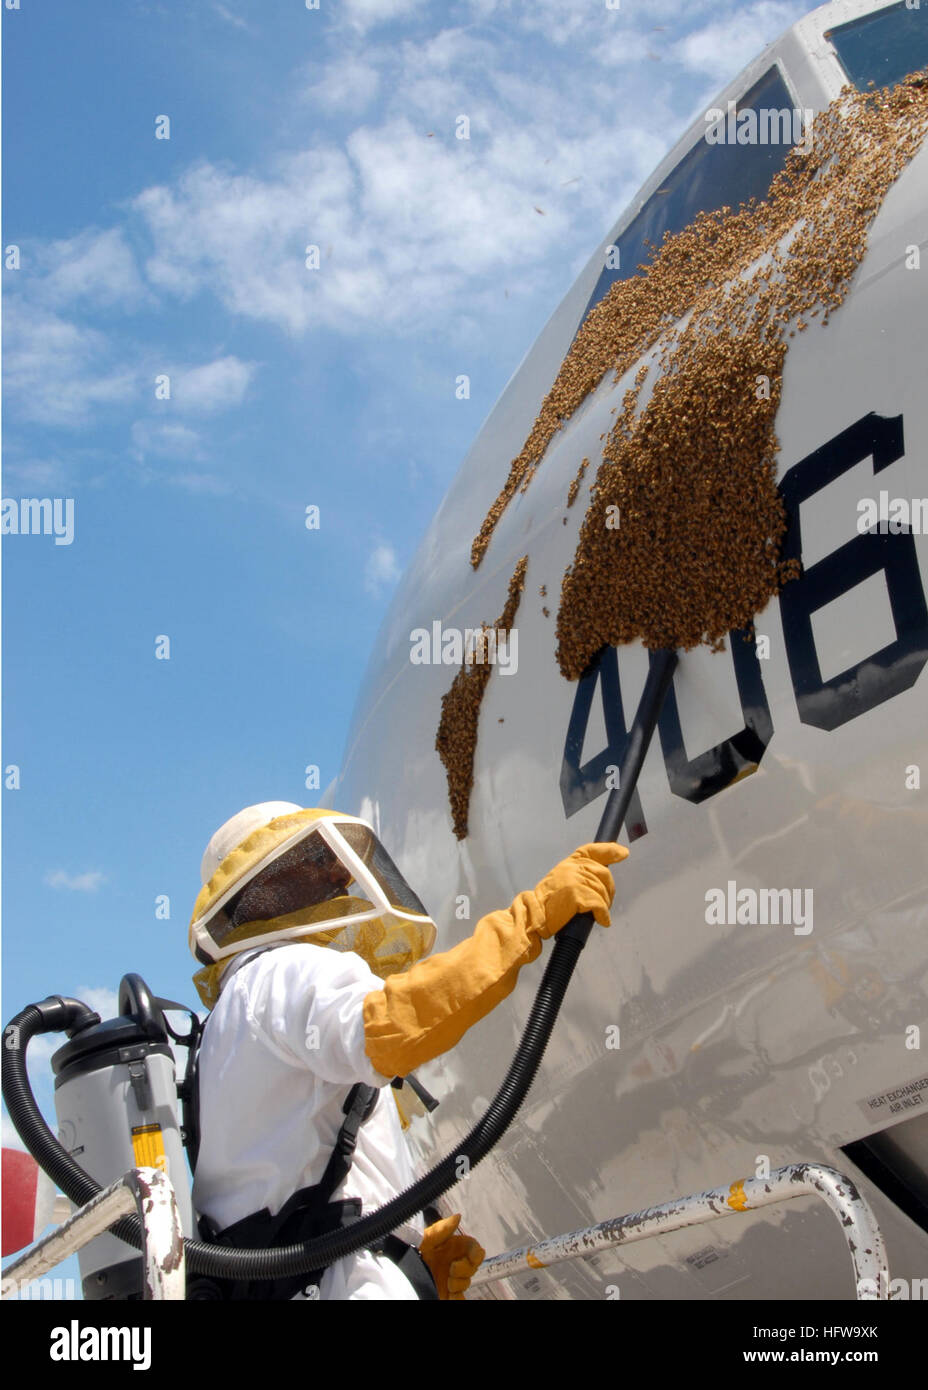 080629-N-3013W-047  OKINAWA, Japan (June 29, 2008) Aviation Airman 1st Class (A1C) Gilbert Hardy, assigned to the Air Force 18th Civil Engineer Squadron uses a vacuum to remove a swarm of Japanese honey bees from a Patrol Squadron (VP) 16 P-3C Orion. It is speculated that the bees sheltered on the aircraft from the heat and wind while in transit to a new hive site. VP-16 and Consolidated Maintenance Organization (CMO) 11 Det. BRAVO are deployed in support of Commander, U.S Navy 7th Fleet. U.S. Navy photo by Mass Communication Specialist 2nd Class Charles White (Released) US Navy 080629-N-3013W Stock Photo